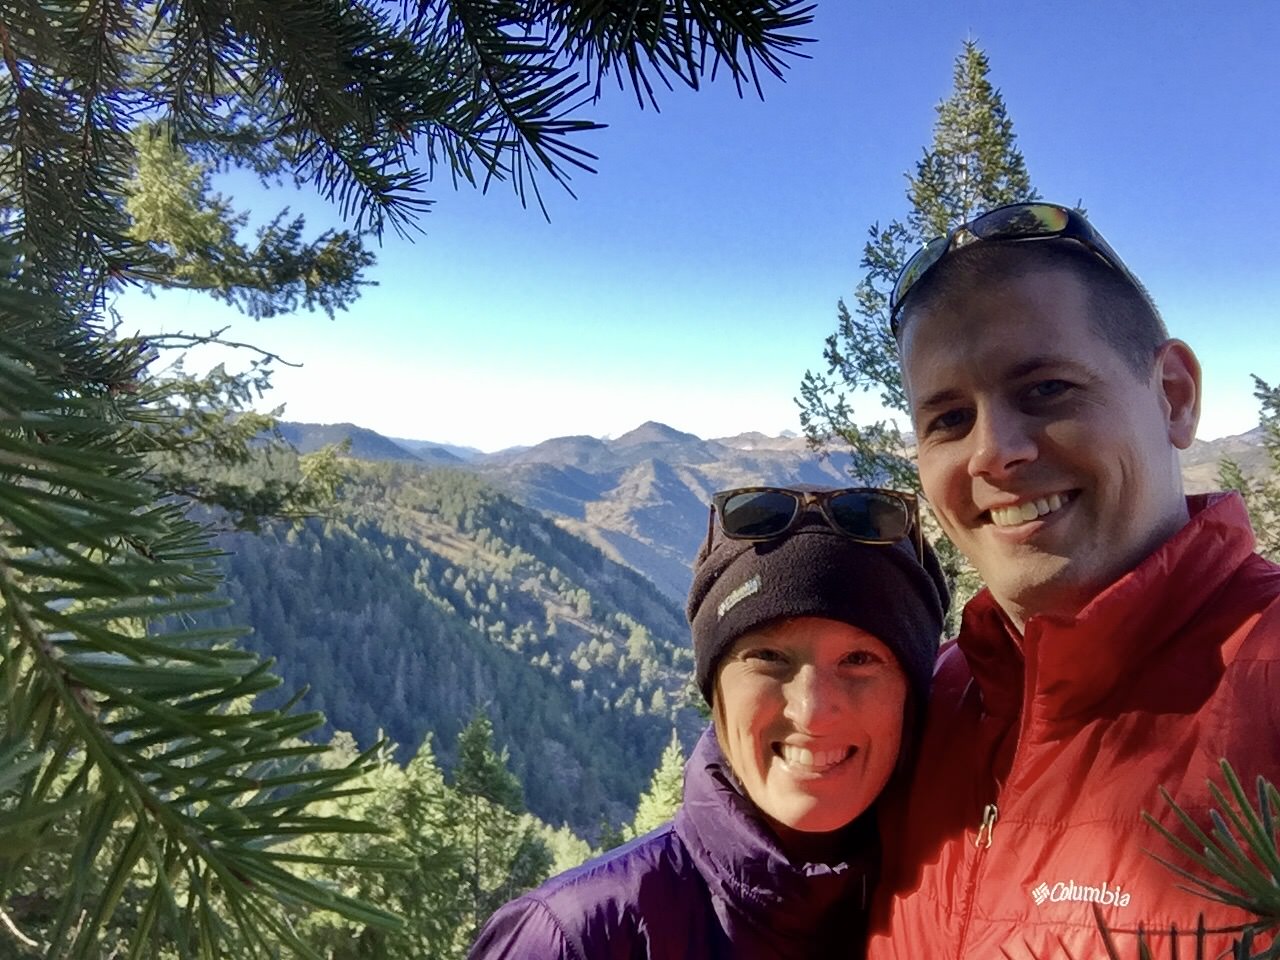 Couple taking a selfie with mountains in the background.